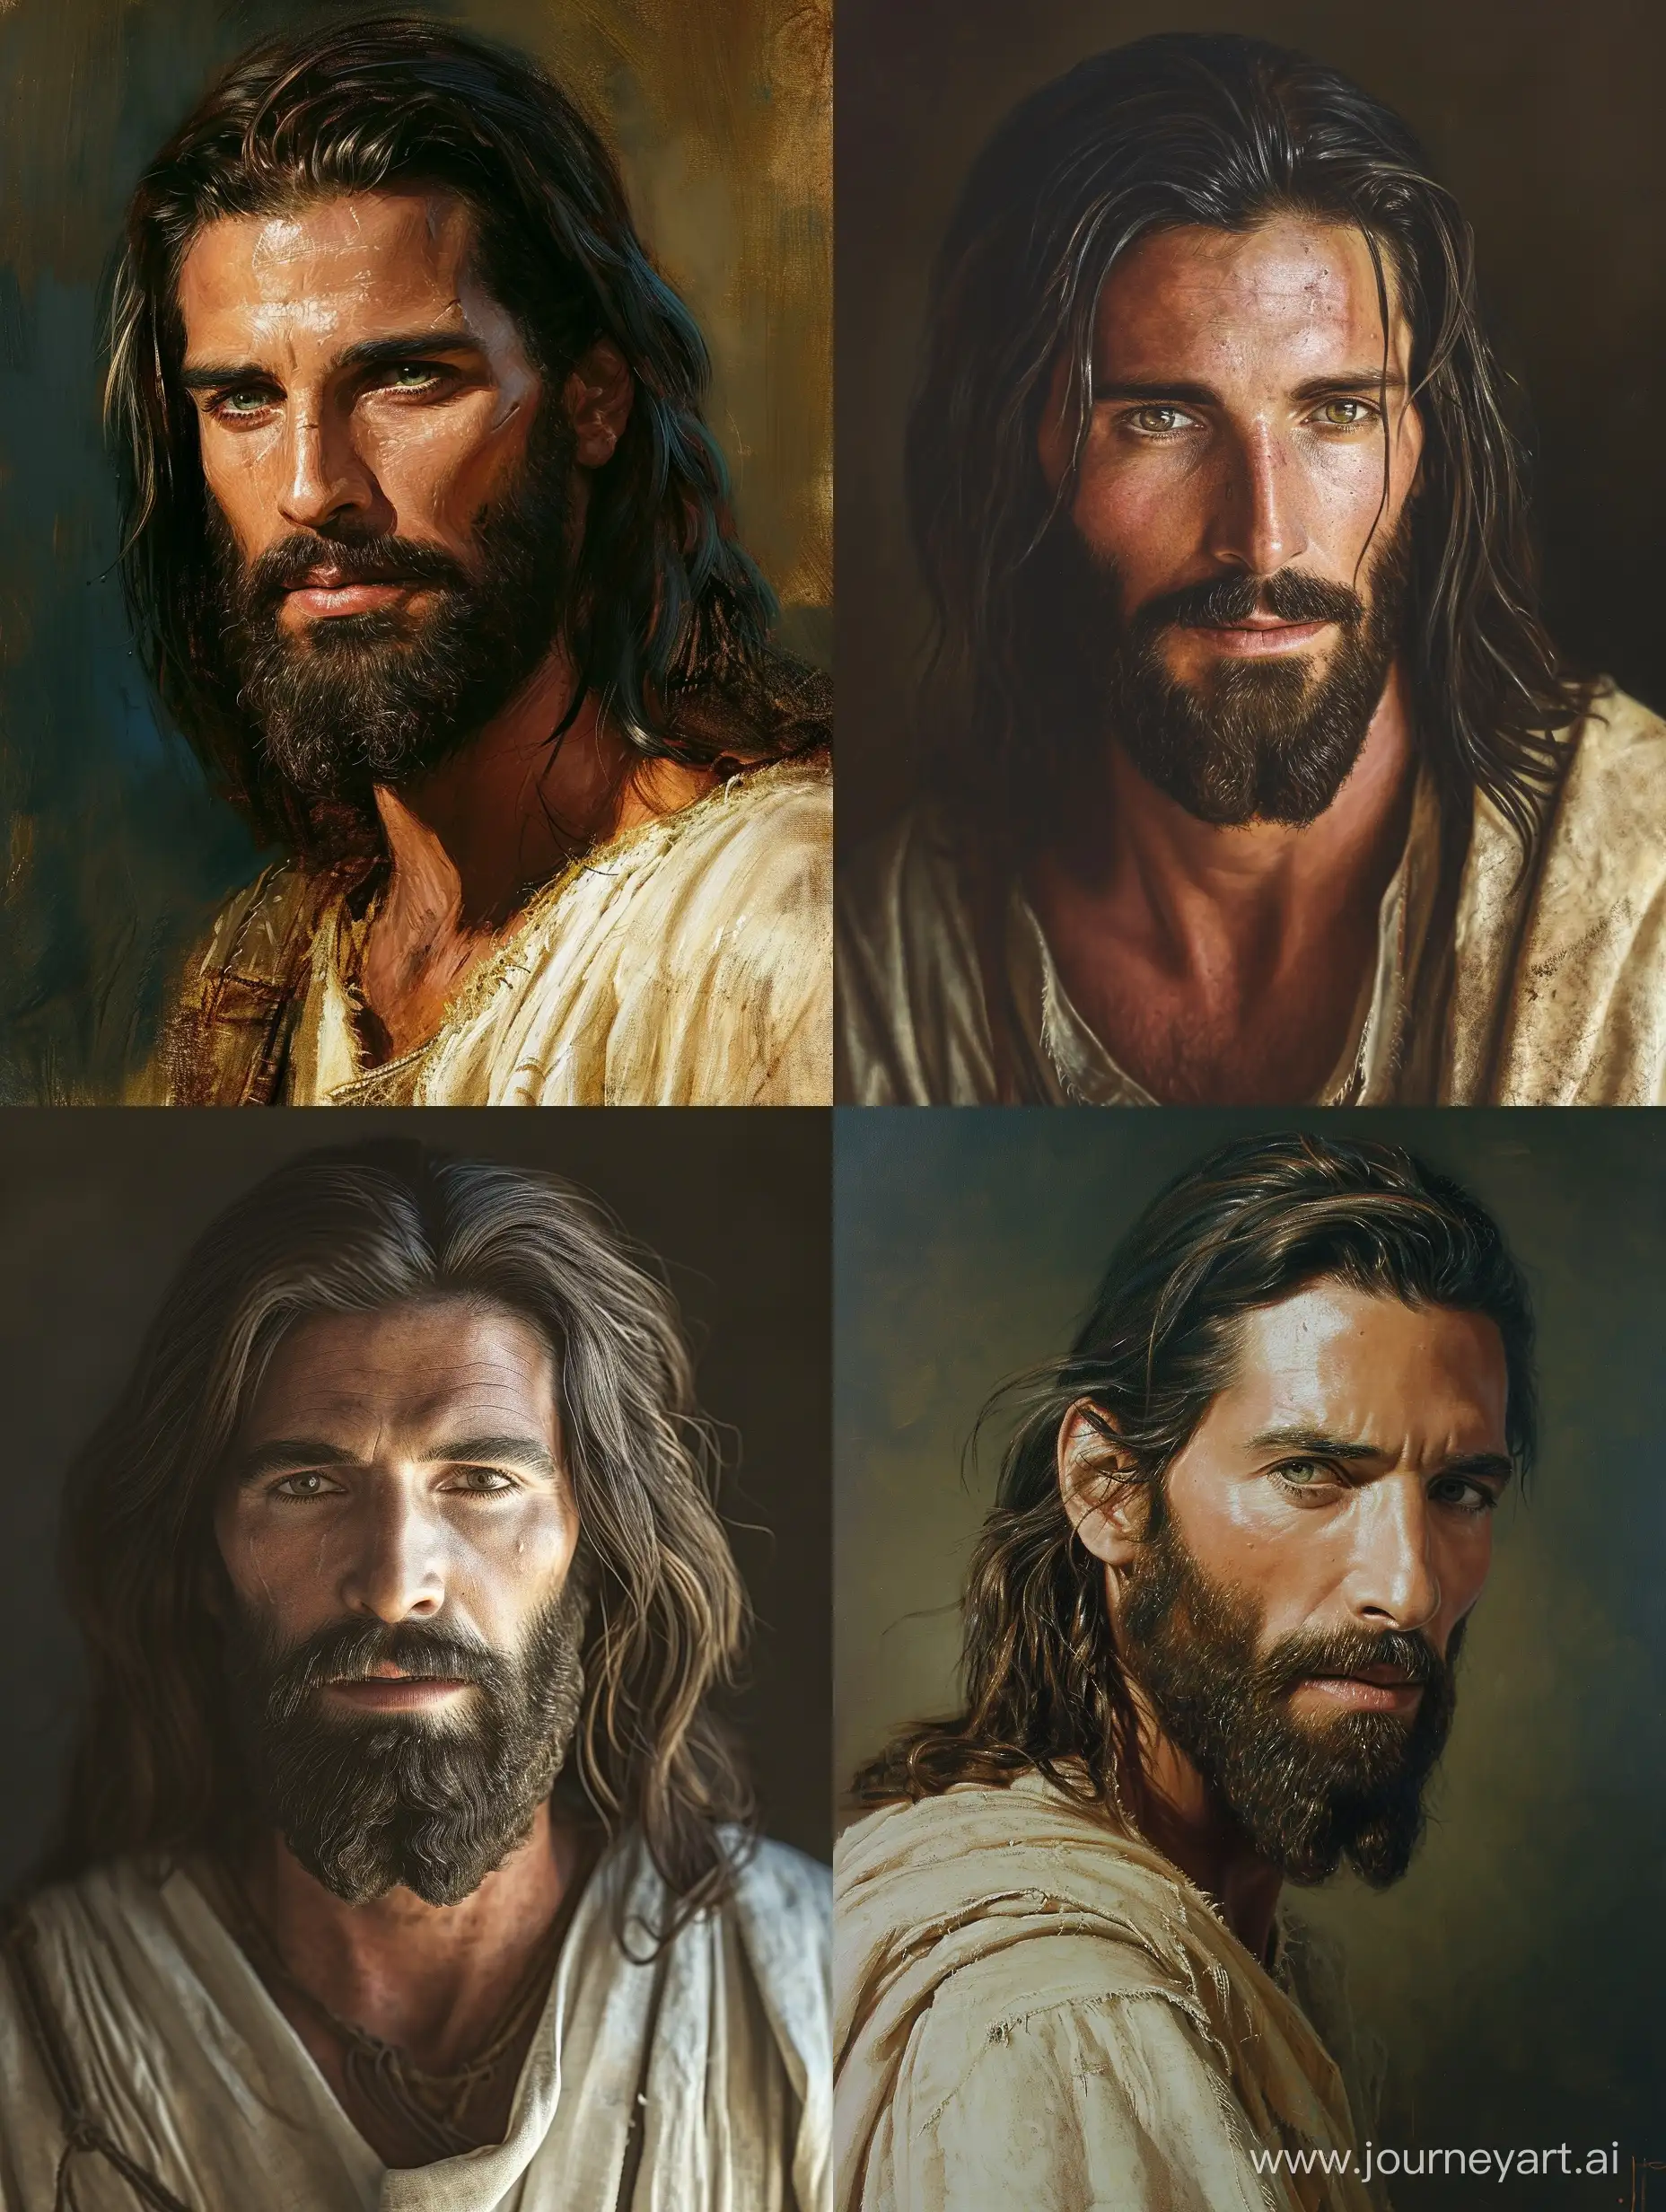 Envision a portrait that captures the essence of Jesus of Nazareth with realism and reverence. Jesus has a serene expression, reflecting wisdom and compassion. His eyes convey a depth of understanding, and his beard and long hair are meticulously detailed. The facial features exhibit a combination of strength and gentleness, reflecting his divine and human nature.
The clothing could consist of traditional garments worn during the historical period, with attention to textures and folds. The overall atmosphere of the portrait should evoke a sense of humility and grace.
Consider incorporating soft, natural lighting to enhance the realism of the scene, allowing shadows to highlight the contours of his face. Attention to realistic details, such as skin texture and subtle expressions, will contribute to the authenticity of the portrayal.
Ultimately, the goal is to create a dignified and respectful representation of Jesus of Nazareth, focusing on the humanity and divinity that is integral to his persona.